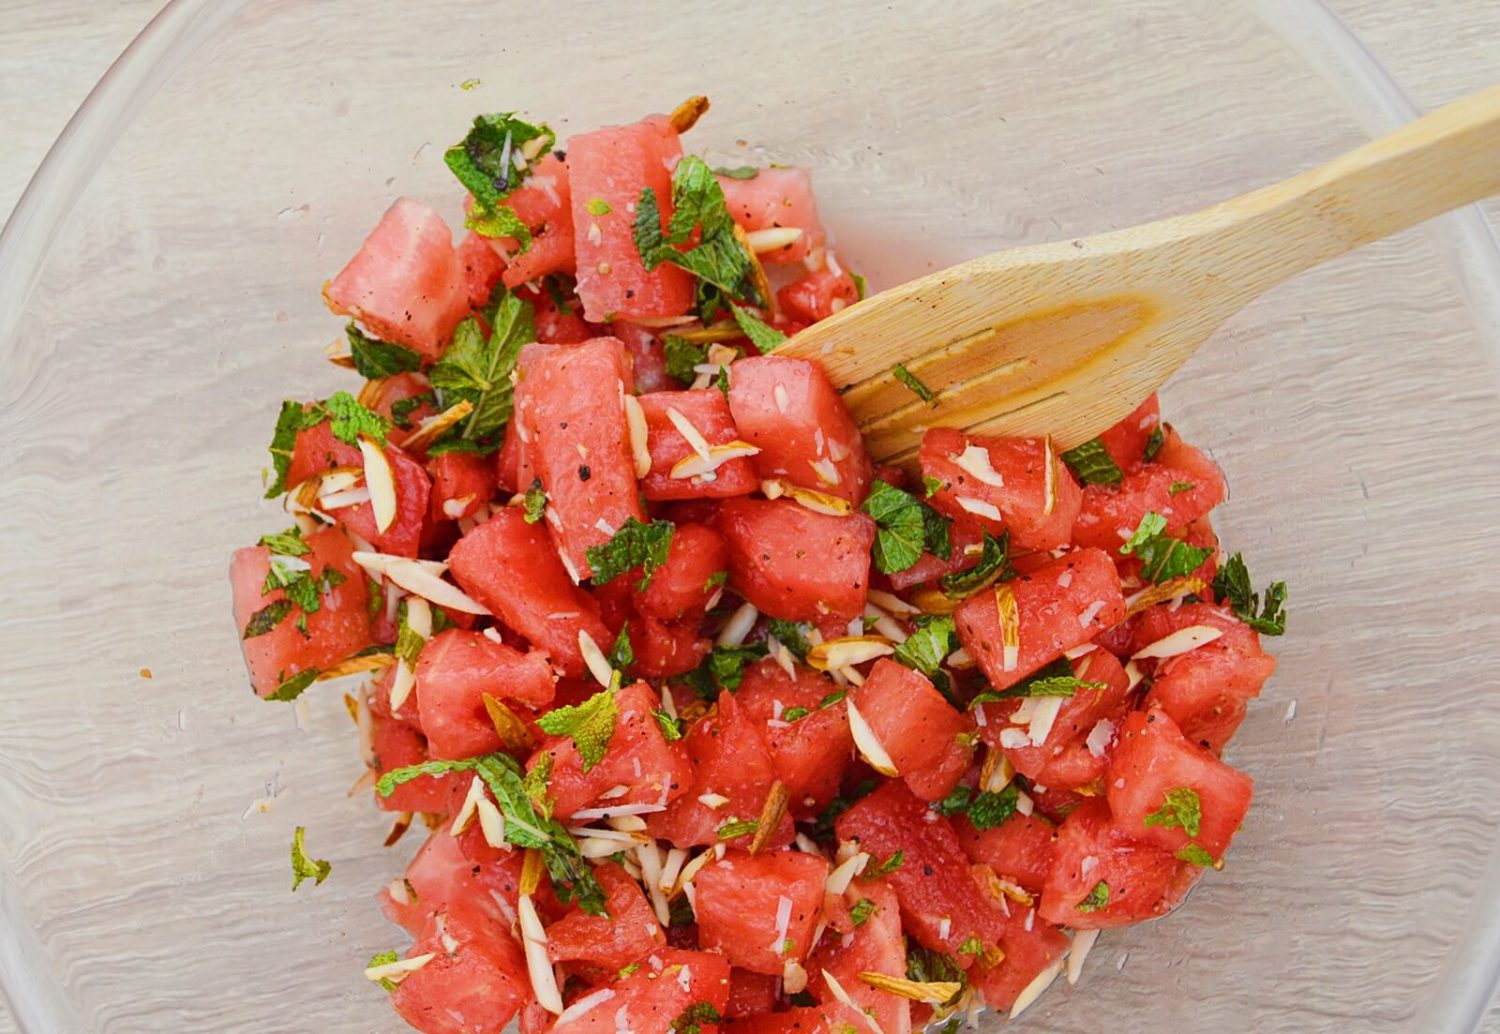 combining all ingredients to make watermelon salad.